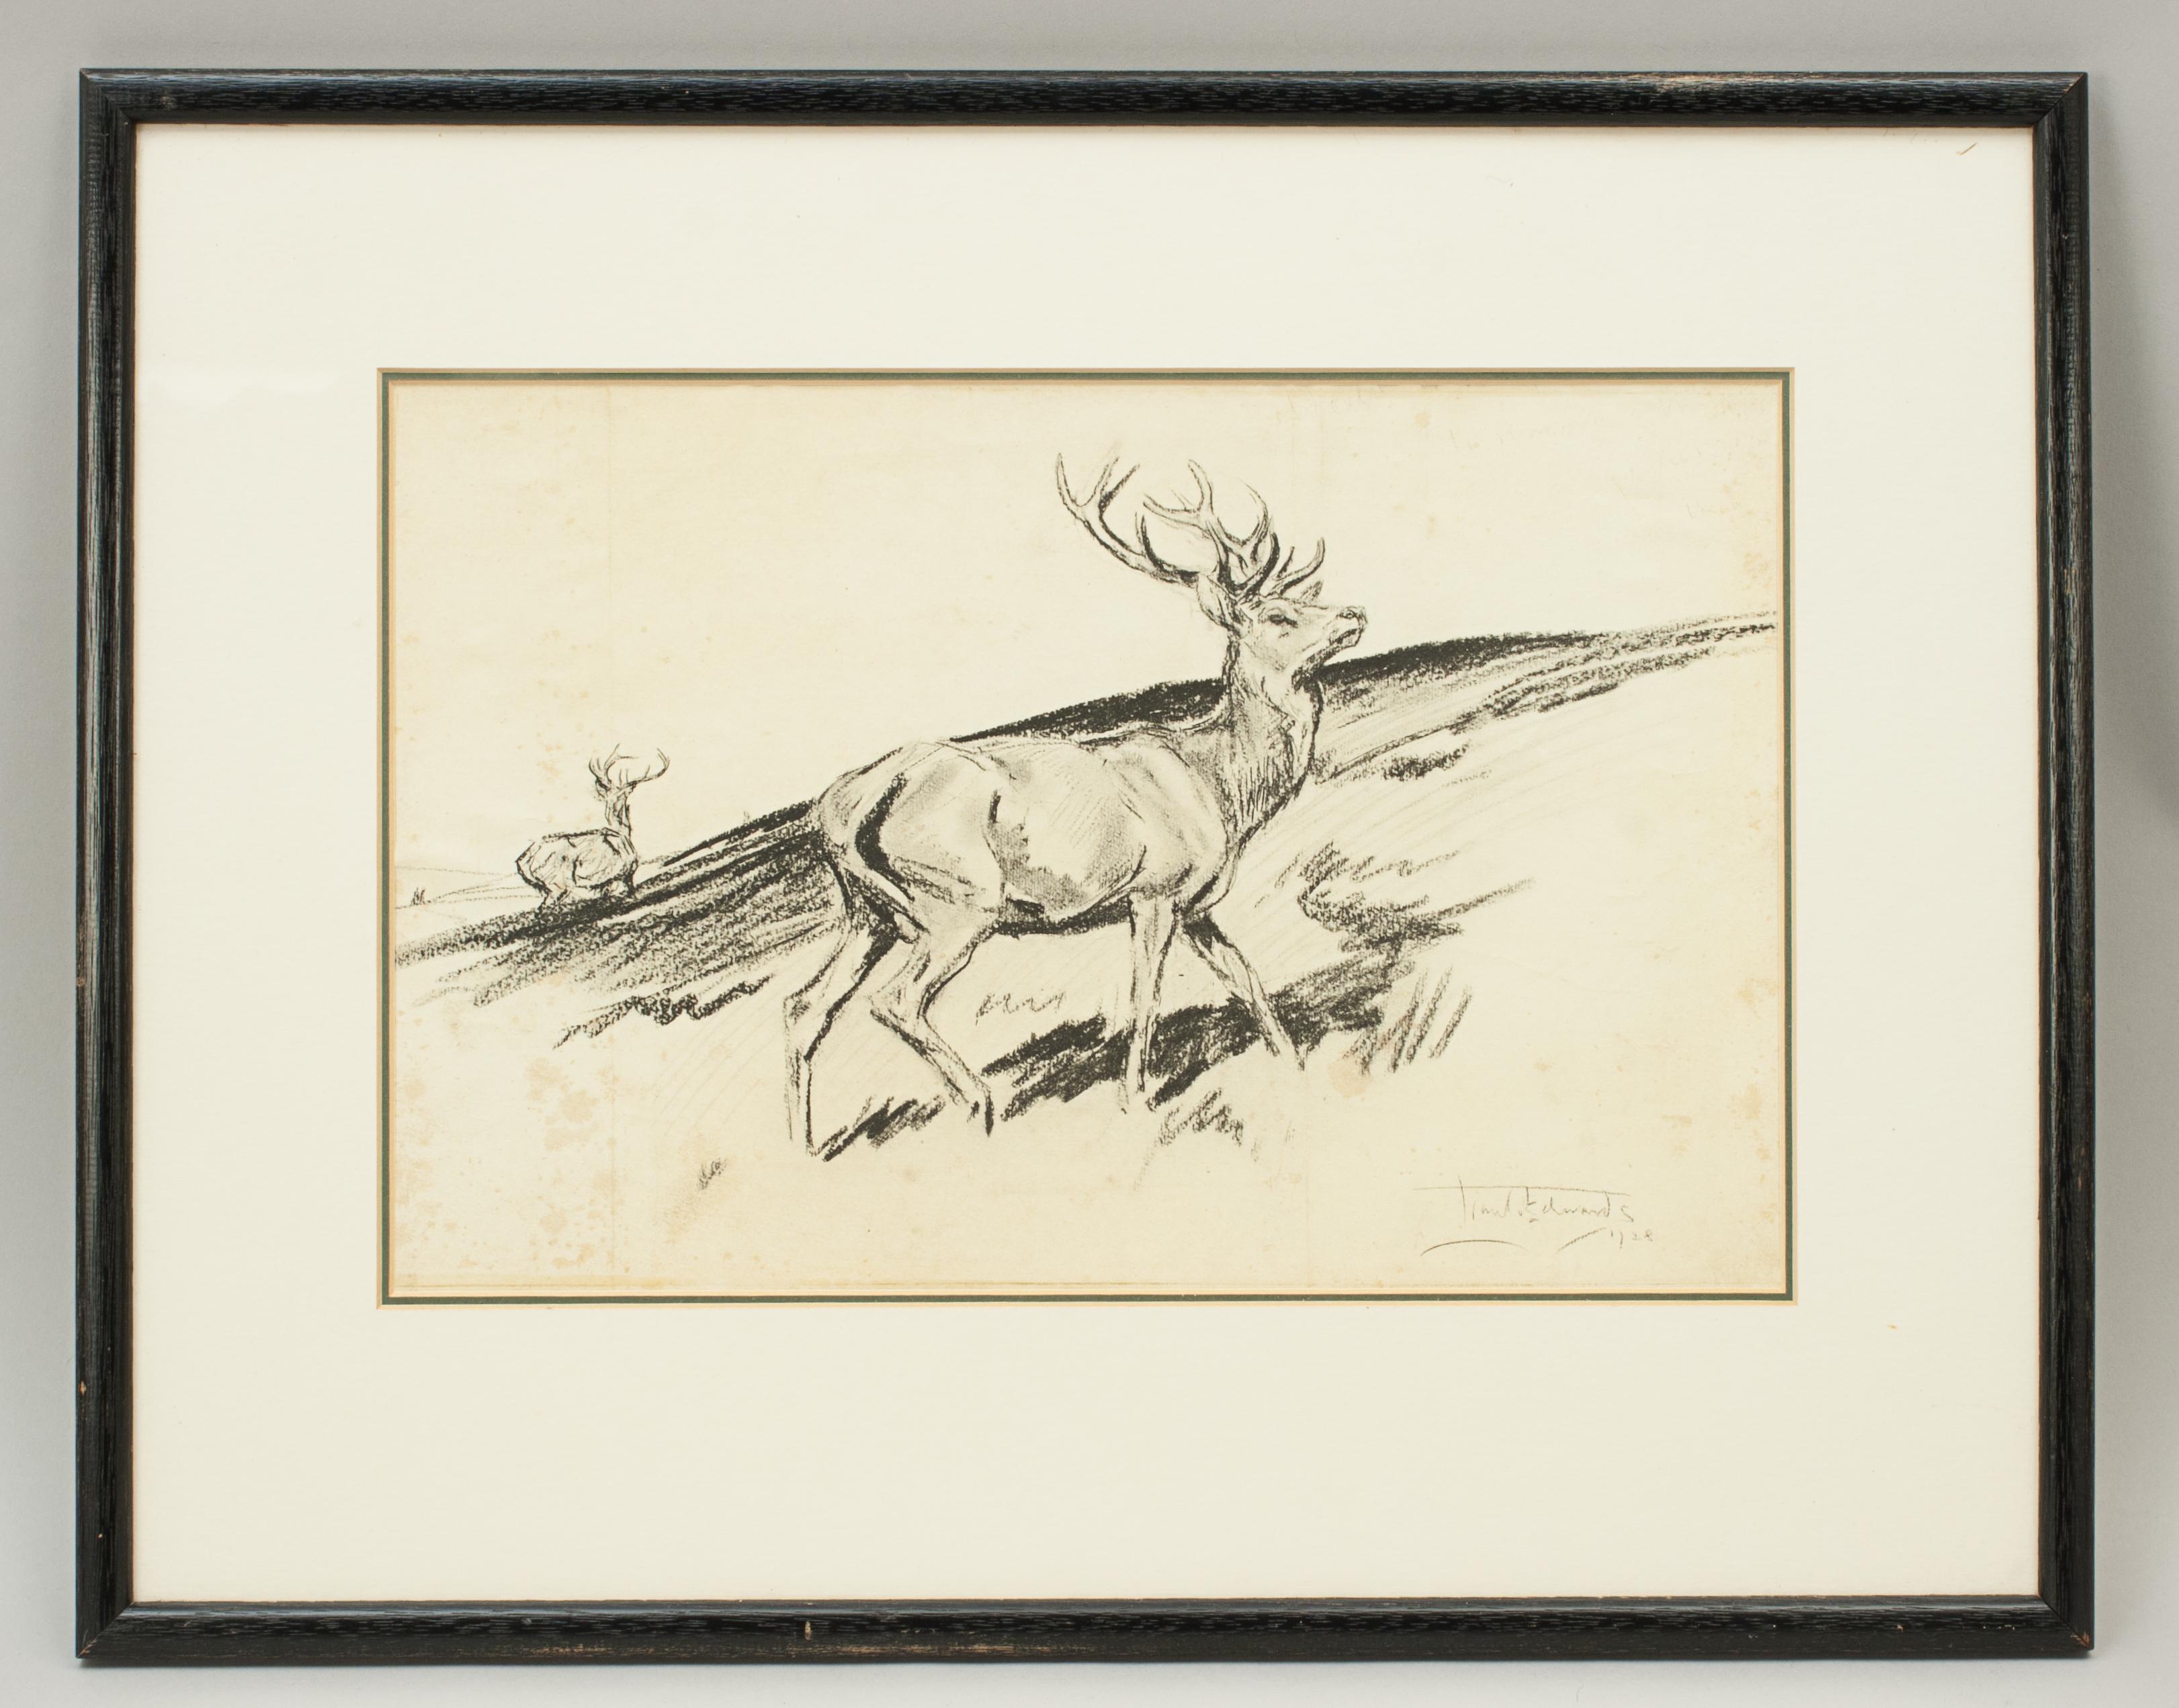 Original Lionel Edwards pencil drawing of a stag on the hill.
A wonderful pencil drawing of a proud stag in the foreground with a second stag in the background. The stag picture is signed and dated by the artist Lionel Edwards, 1928. The drawing is